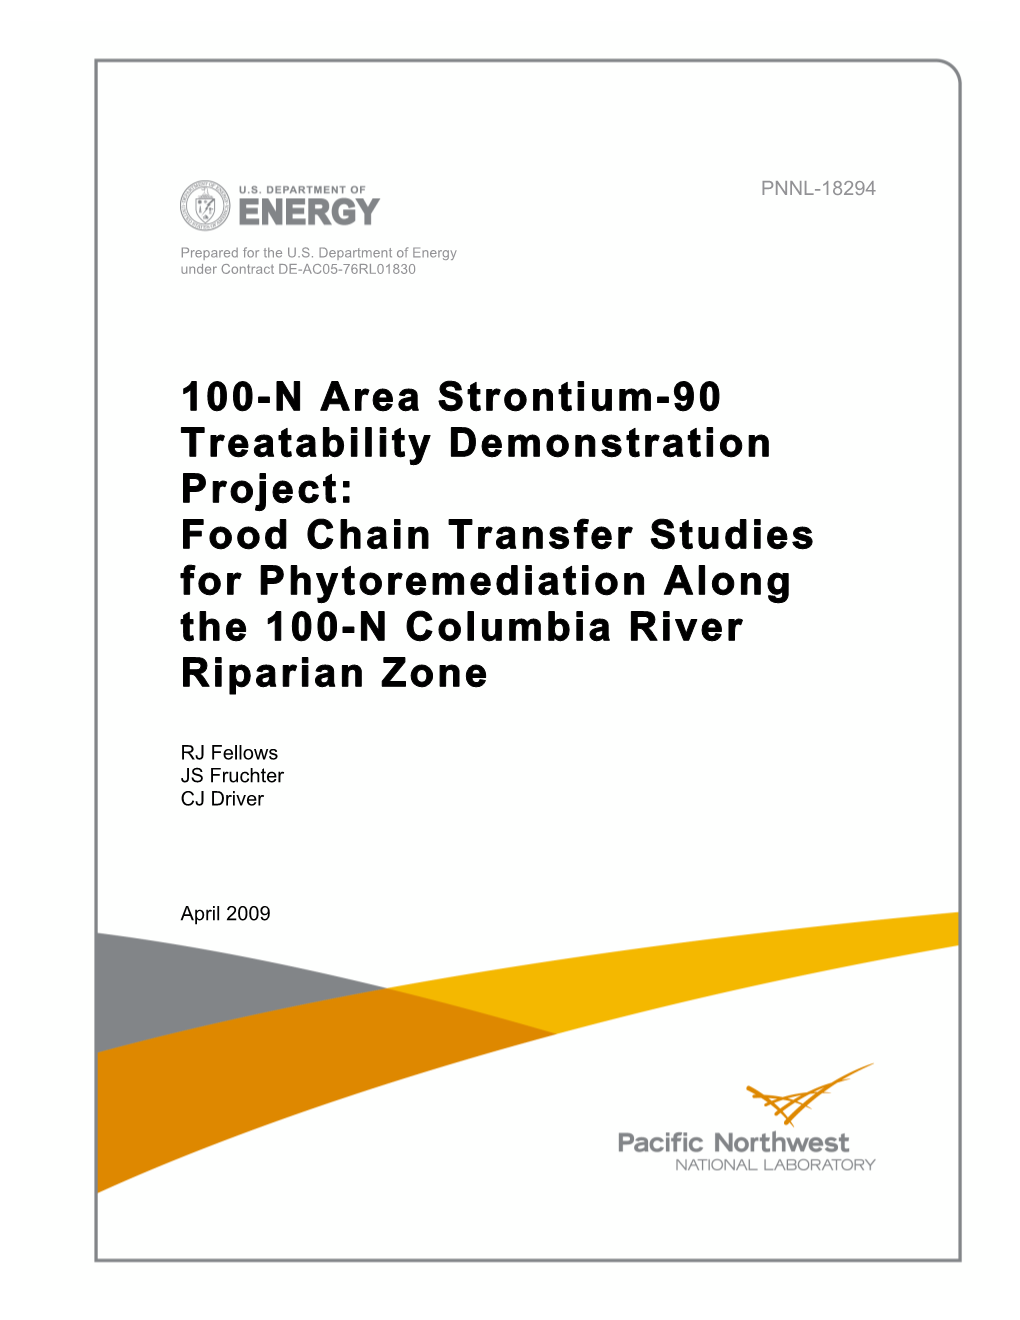 100-N Area Strontium-90 Treatability Demonstration Project: Food Chain Transfer Studies for Phytoremediation Along the 100-N Columbia River Riparian Zone